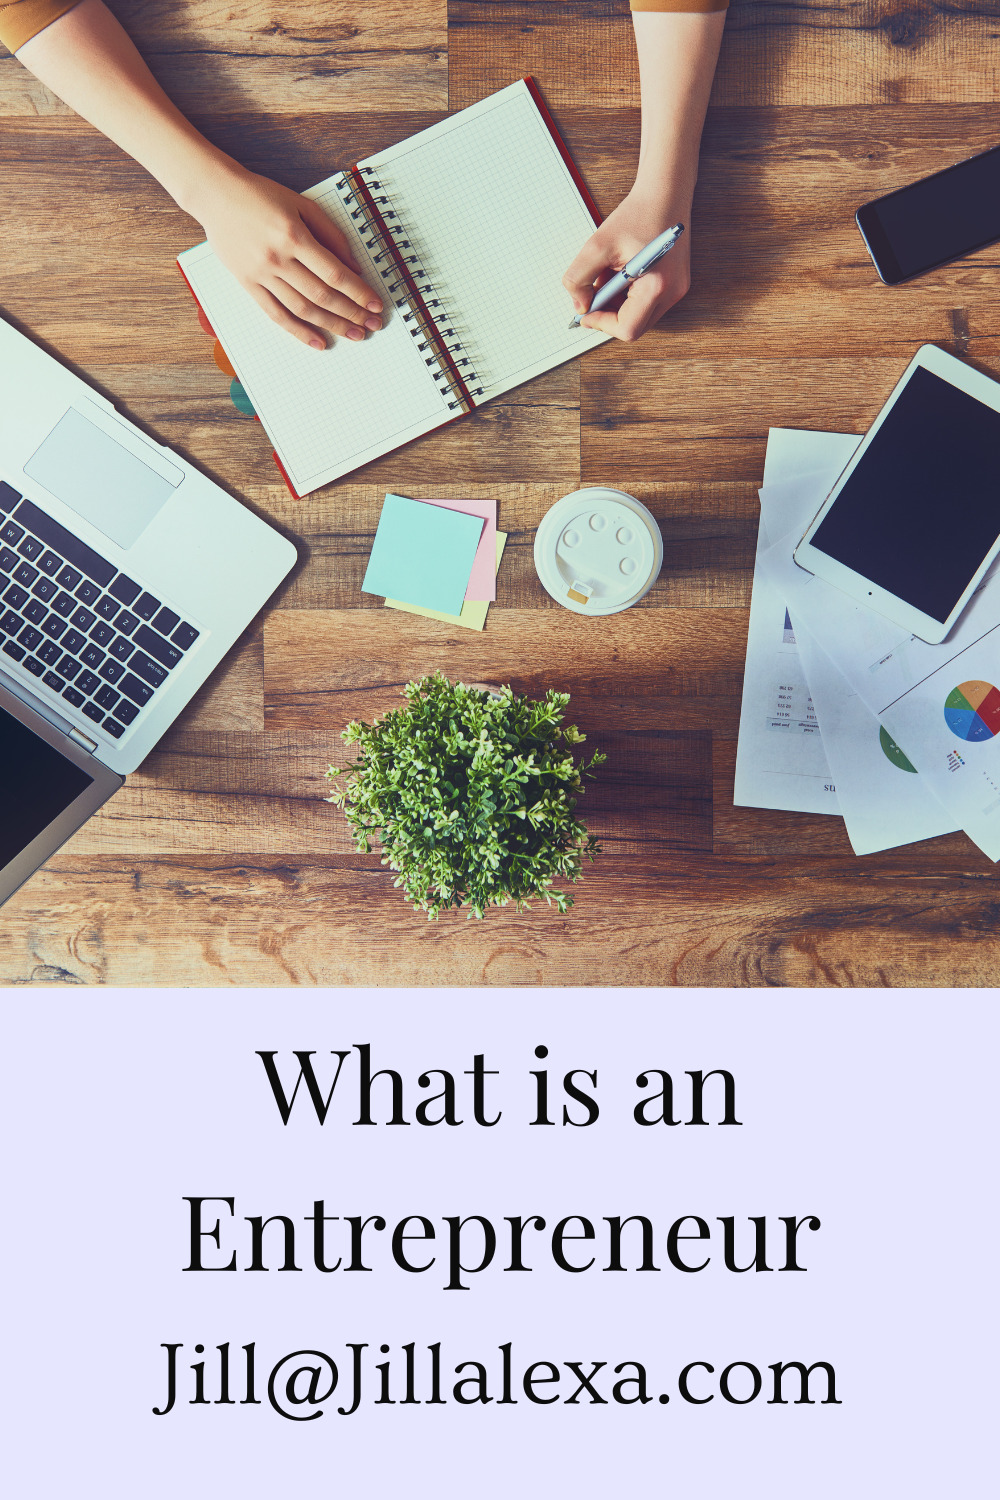 What is an Entrepreneur a Definition - An entrepreneur is someone willing to believe in their skills or ideas and begin their own business despite the odds.